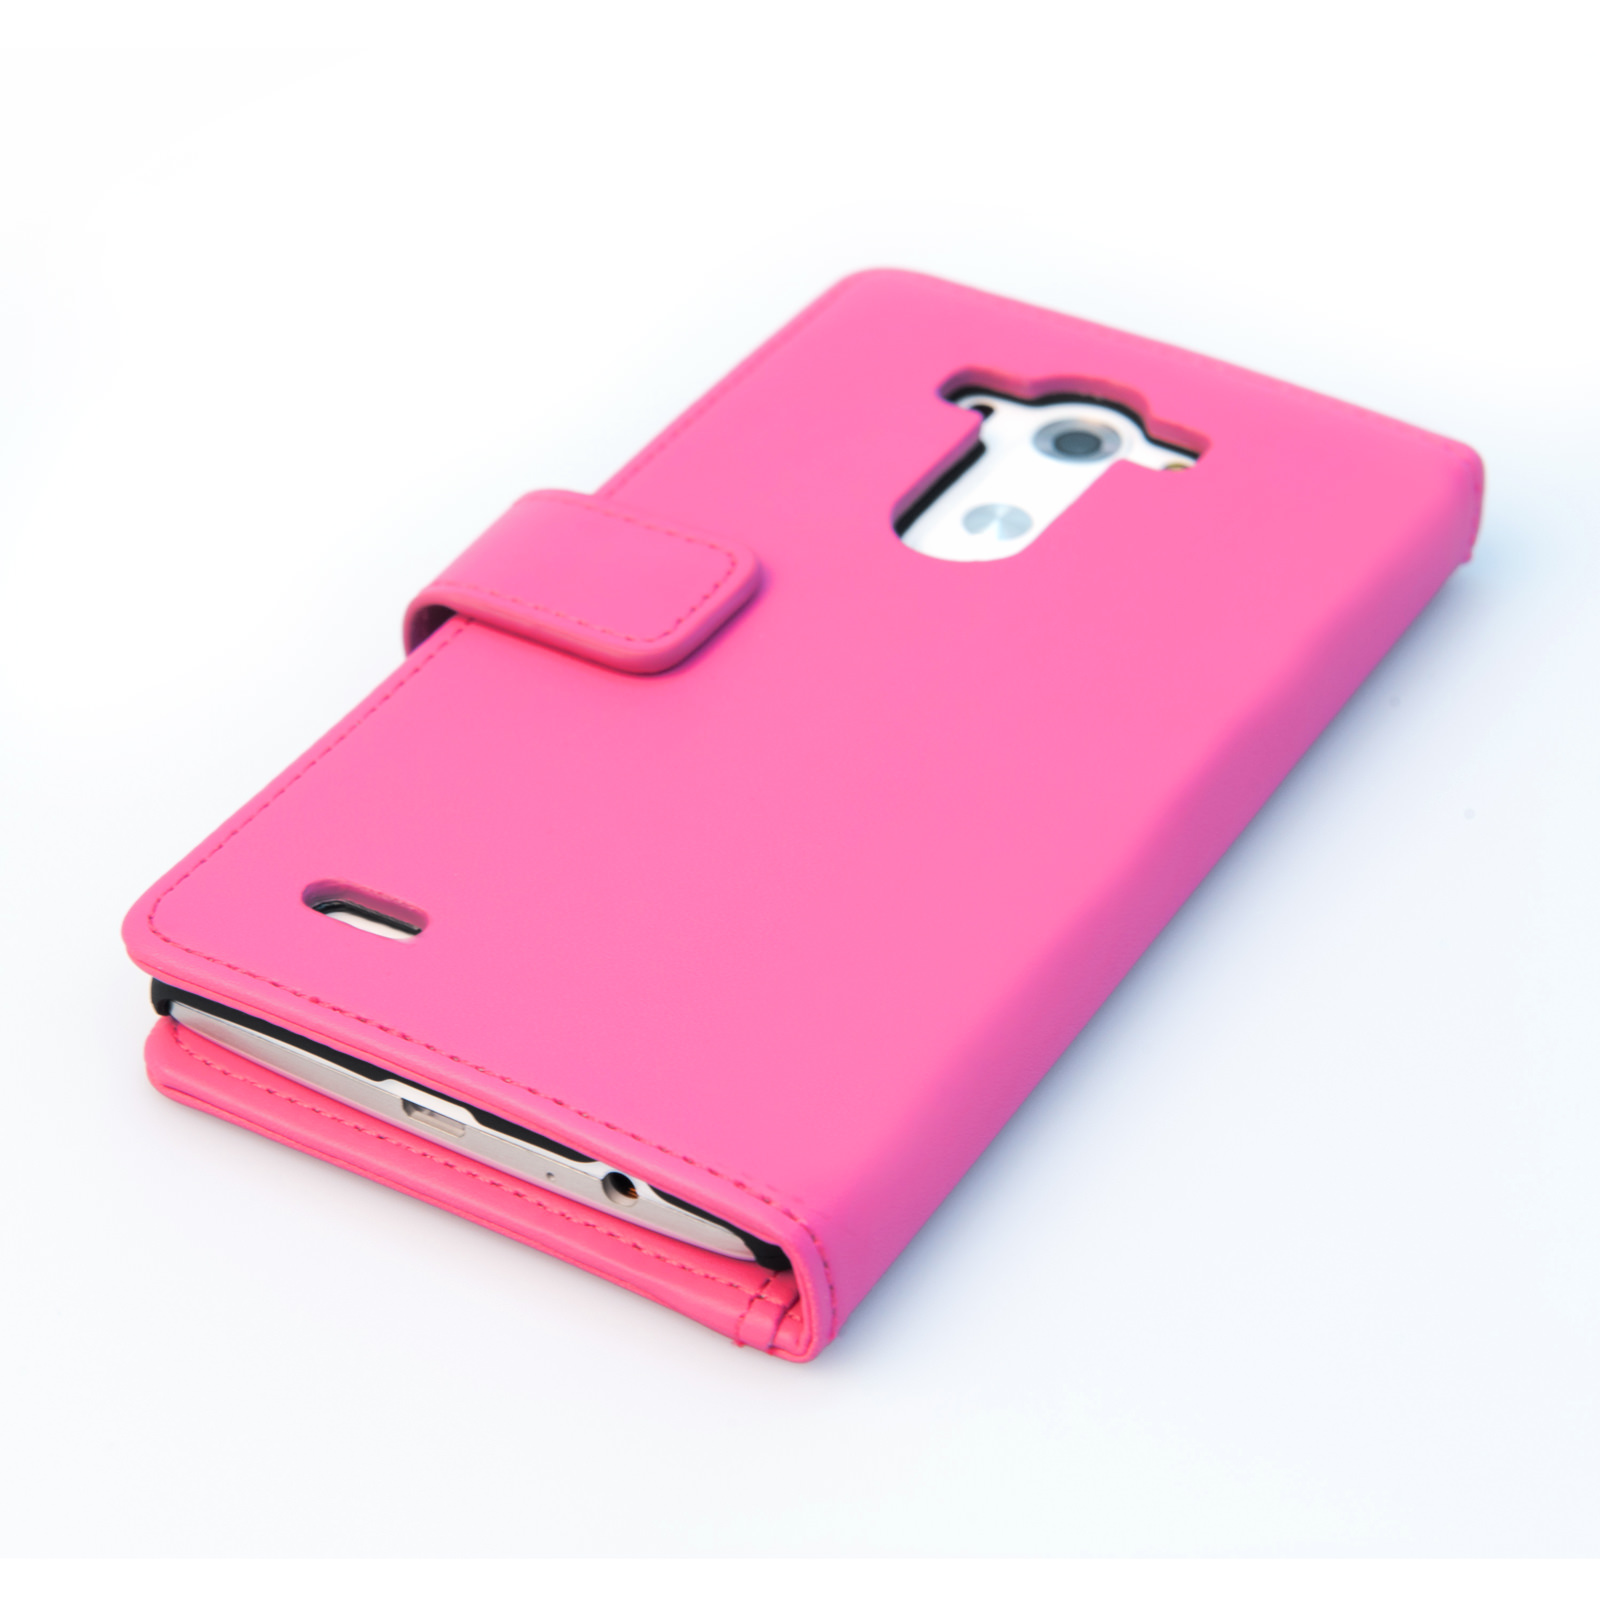 YouSave Accessories LG G3 Leather-Effect Wallet Case - Hot Pink